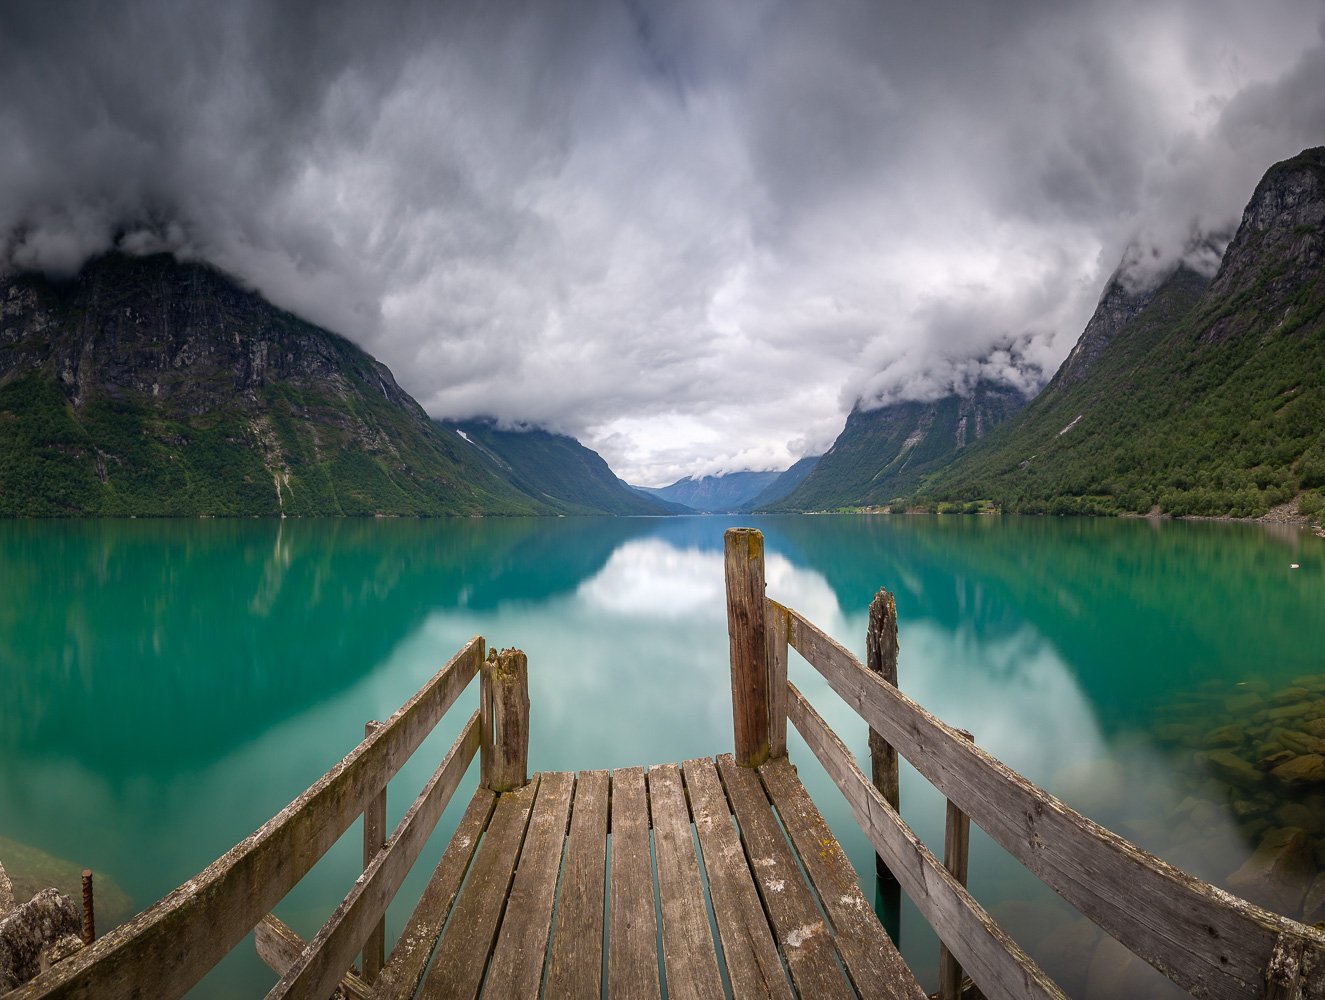 norway,norwegian,lake,clouds,sky,cloudy,lovatnet,mountains,mountain,morning,bridge,water,colour,colorful,nature,natural,, Adrian Szatewicz